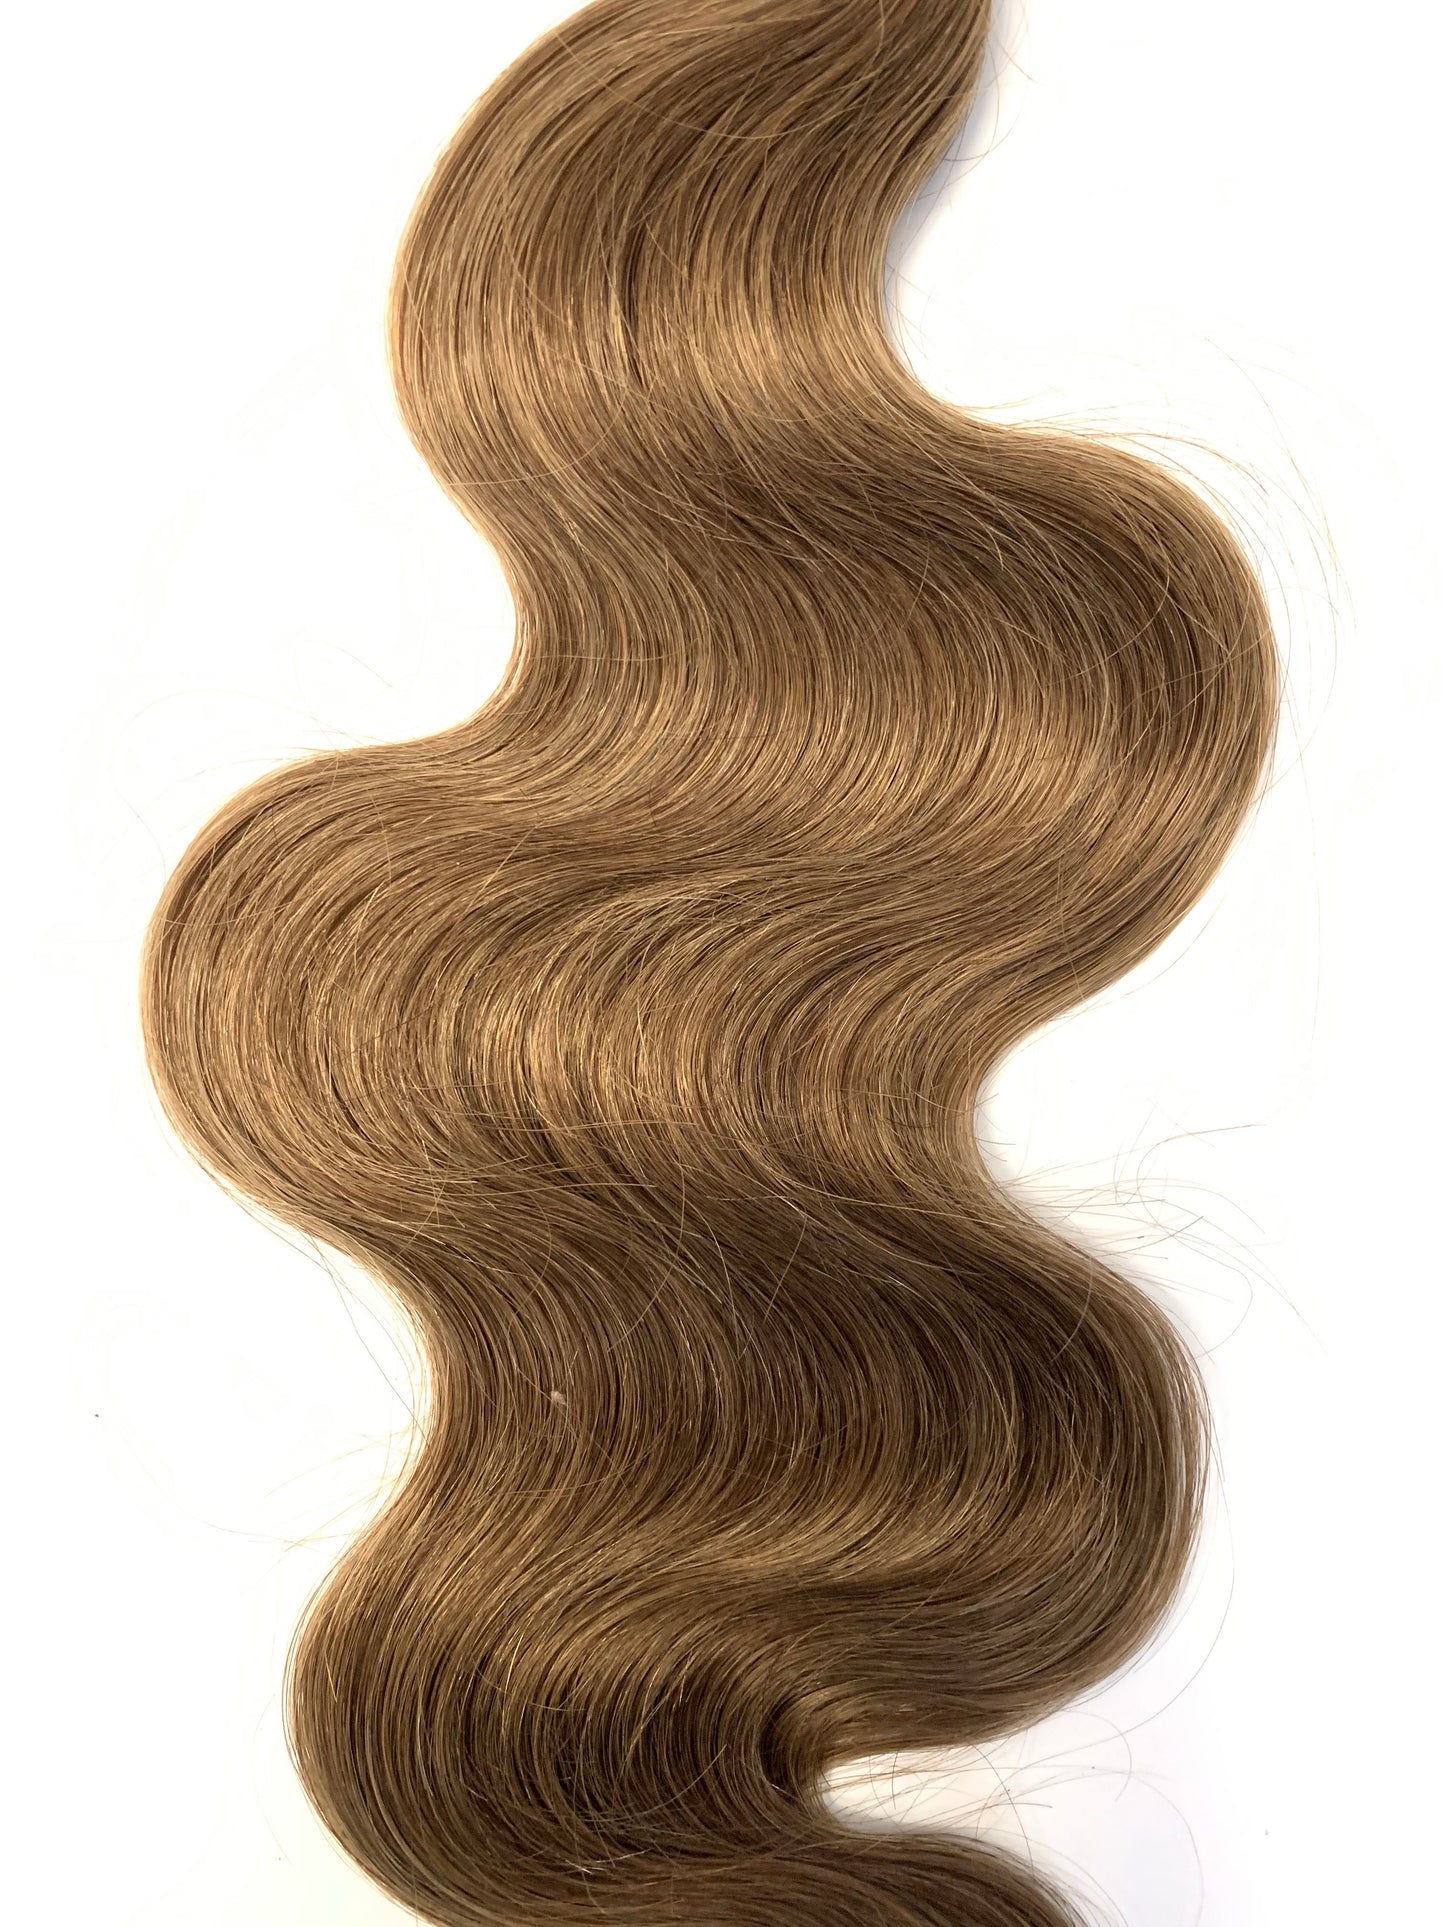 Russian Remy Human Hair, 0.7g i-Tip Extensions, Bodywave, 26'' Colour 8, 50g Quick Shipping!